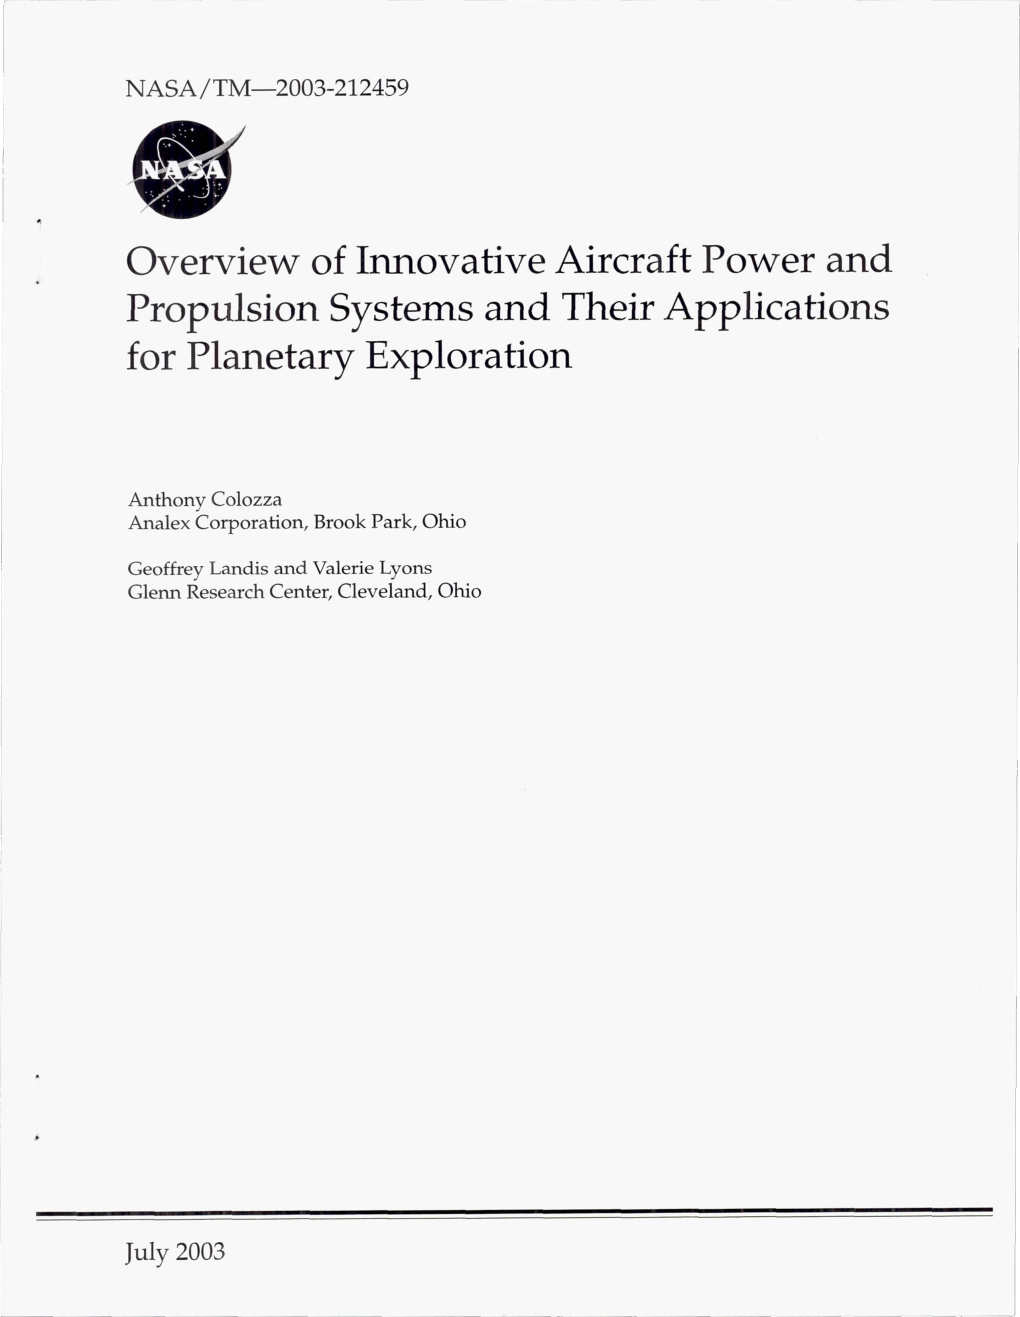 Overview of Innovative Aircraft Power and Propulsion Systems and Their Applications for Planetary Exploration